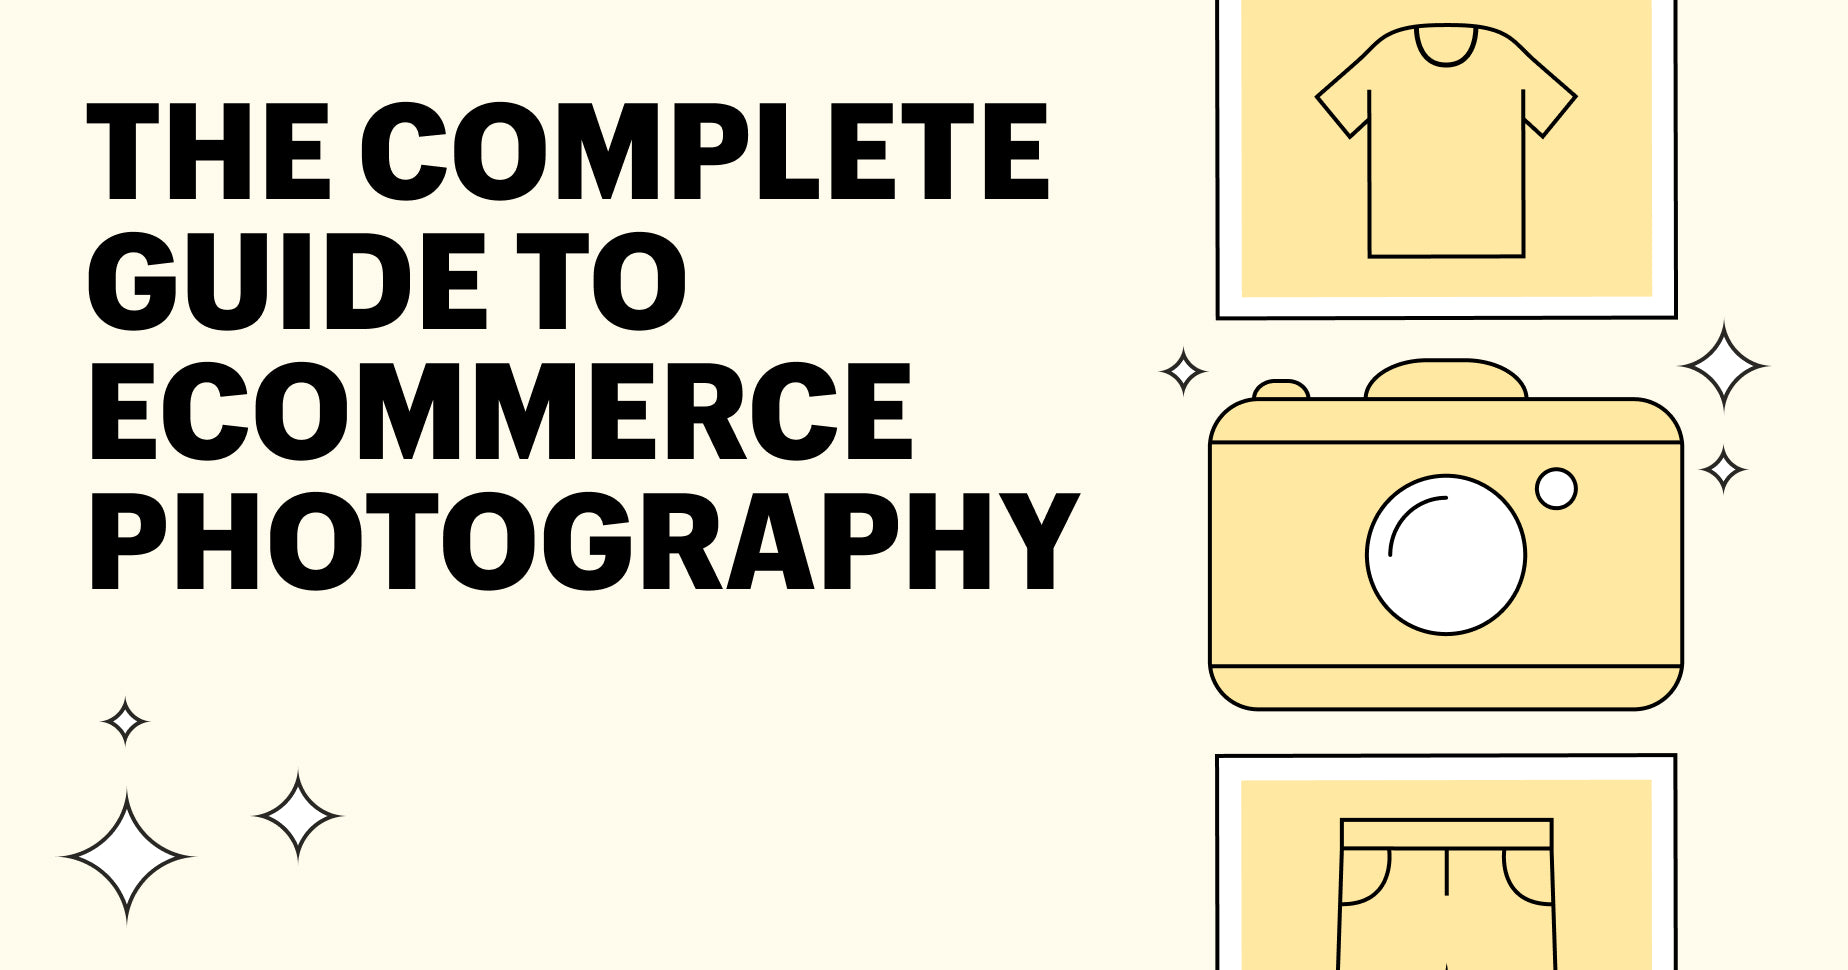 The Complete Guide to Ecommerce Photography